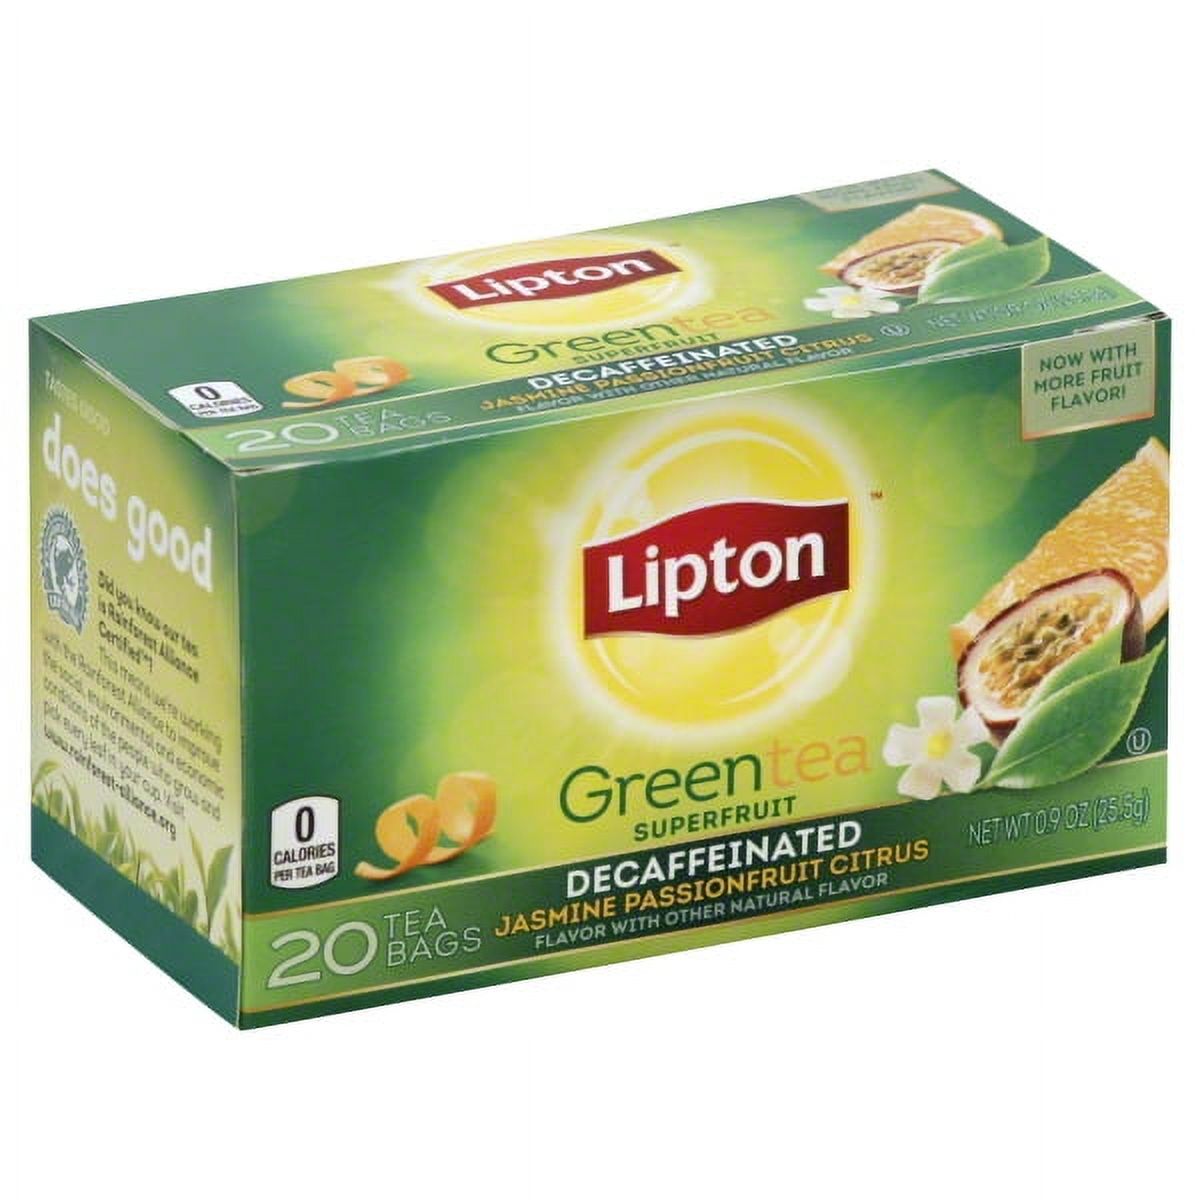 Lipton Decaf Jasmine Passionfruit with Citrus Green Tea Bags, 20 ct - image 1 of 2